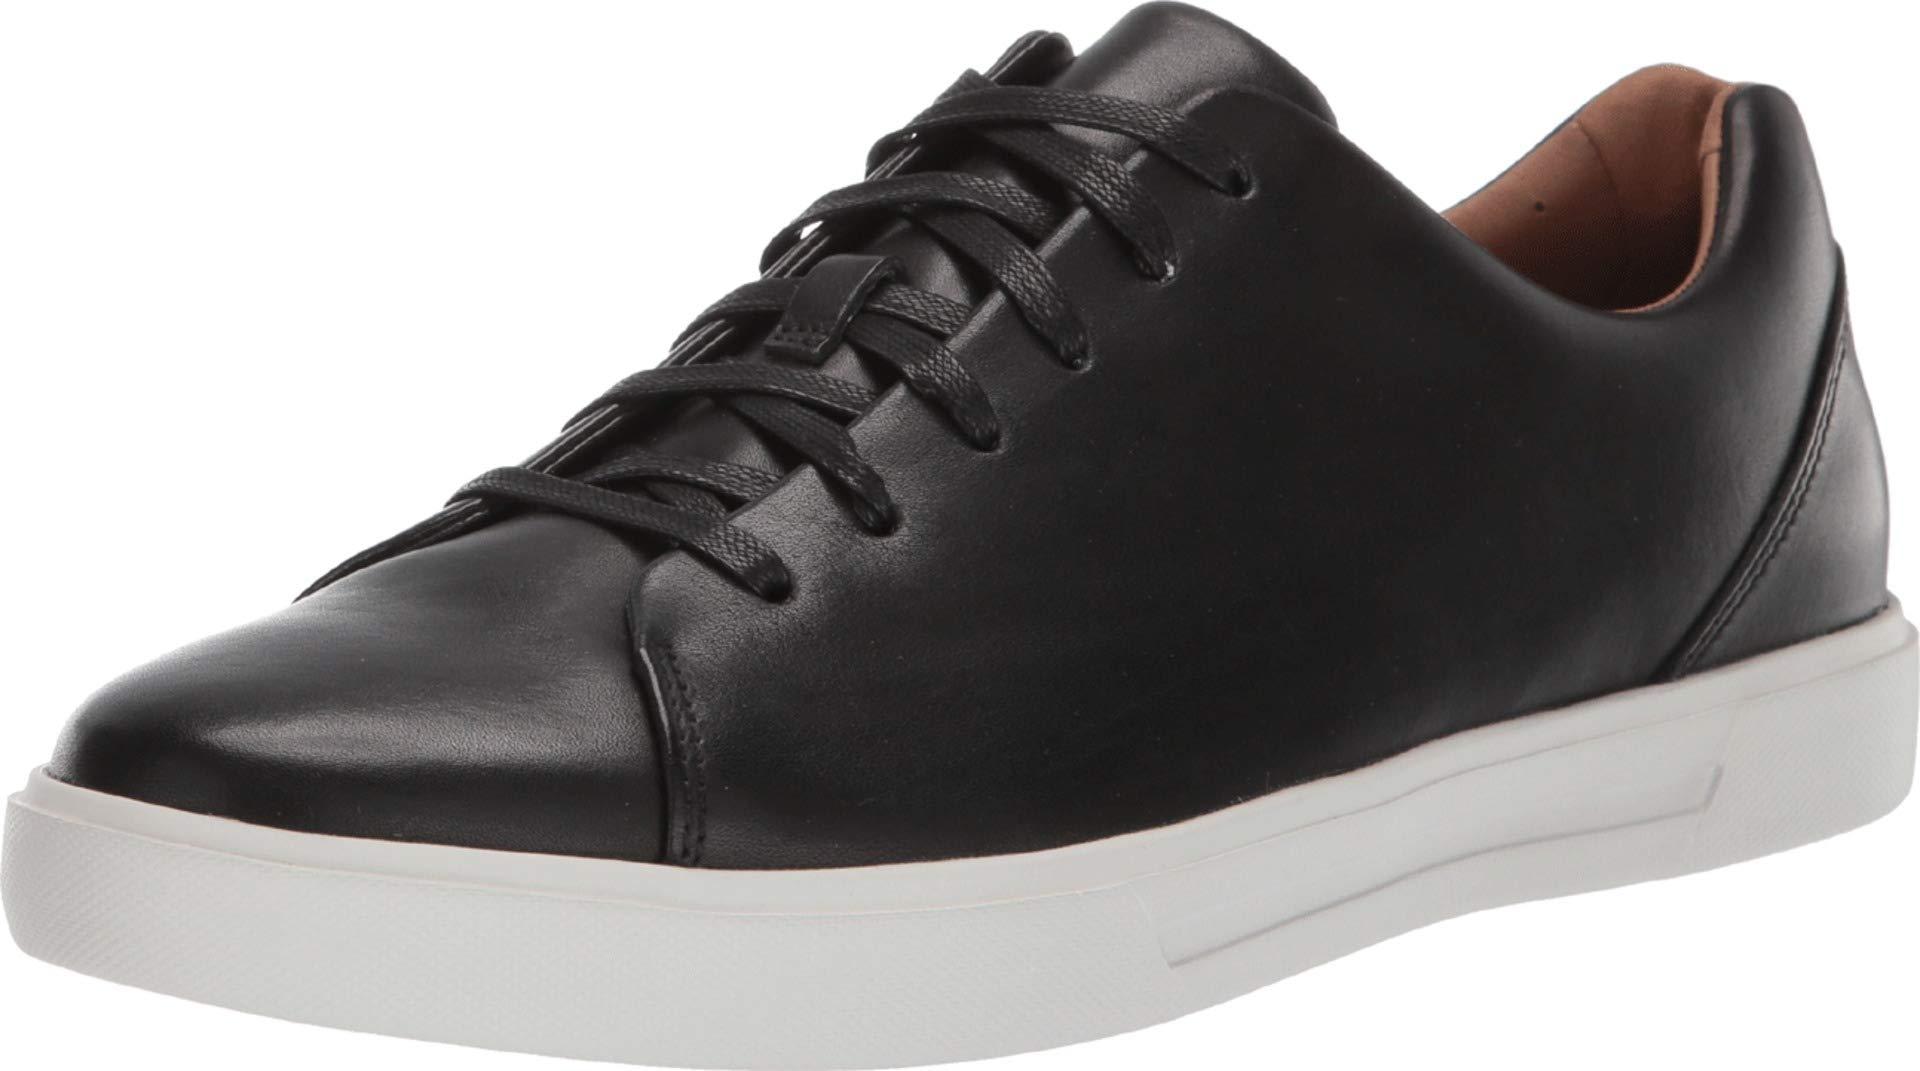 Clarks Un Costa Lace in Black Leather (Black) for Men - Lyst